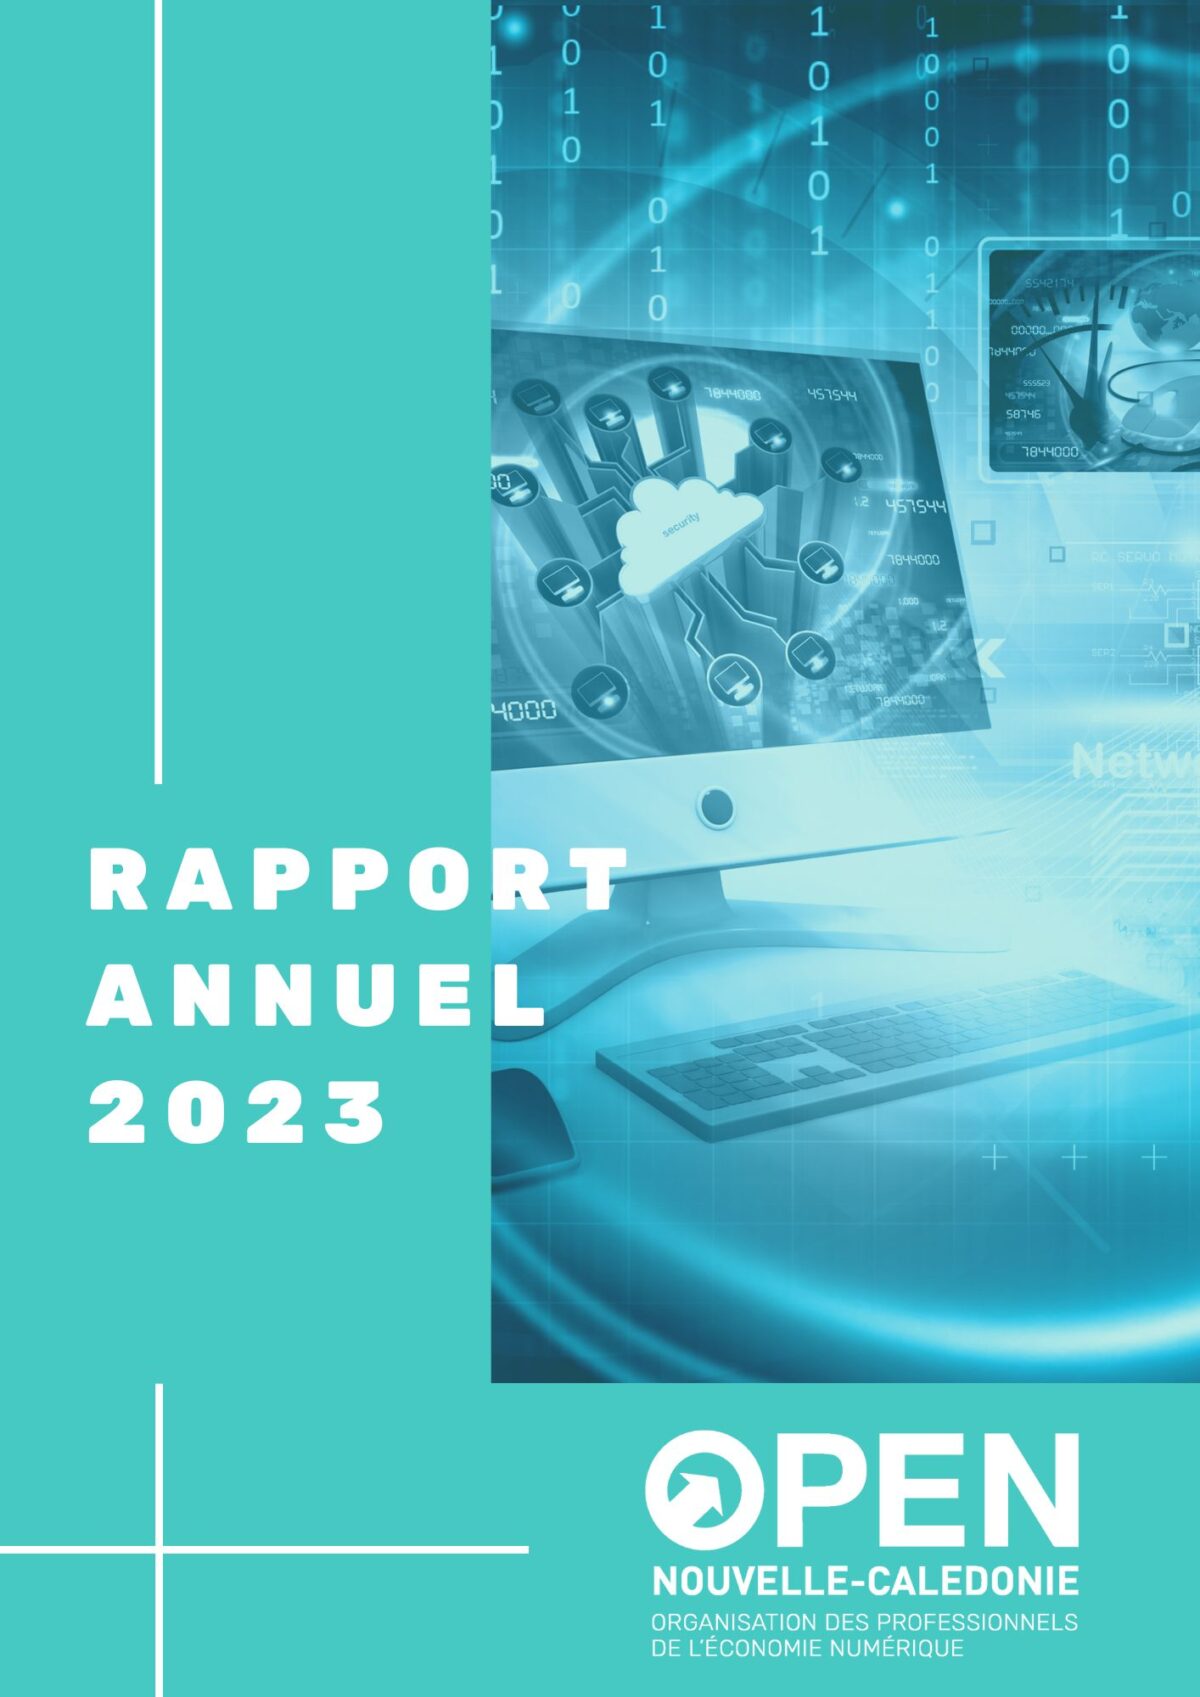 RAPPORT ANNUEL 2023